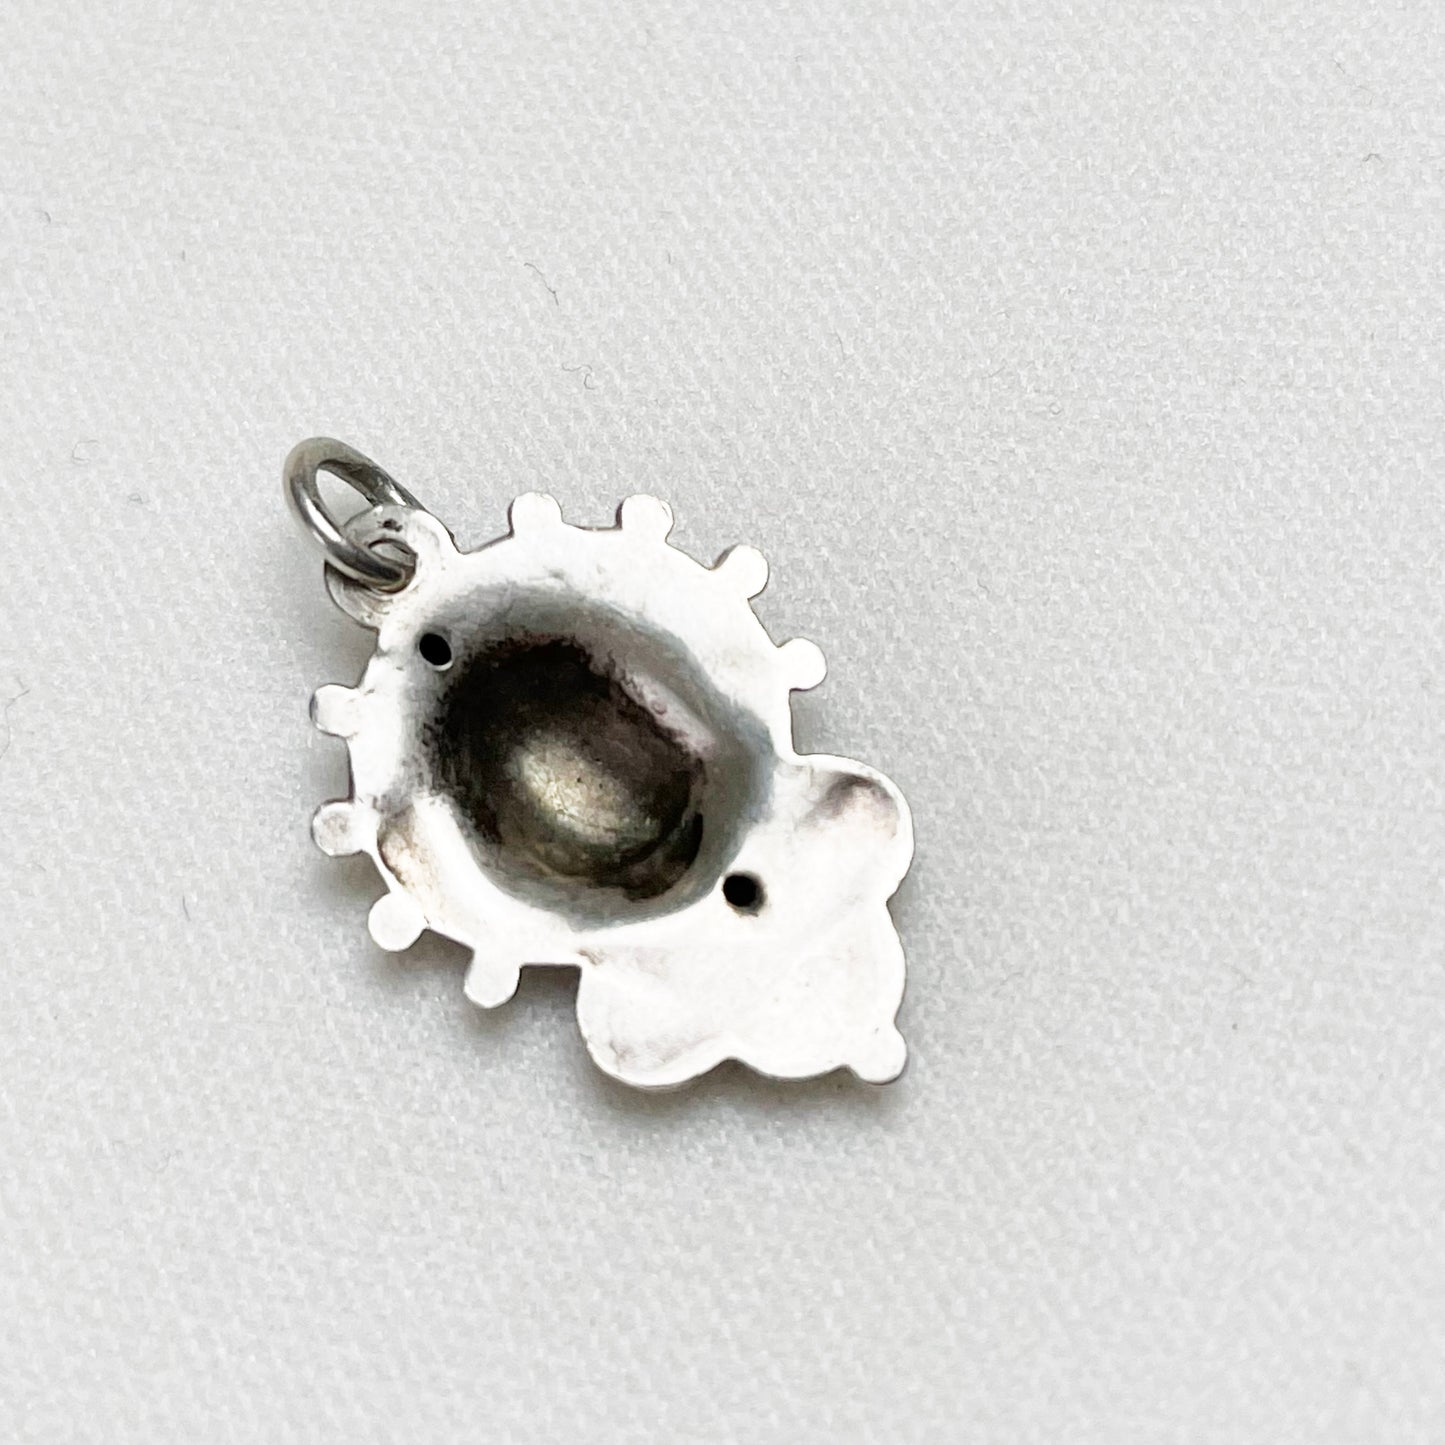 Antique Victorian | Sterling Silver Charm